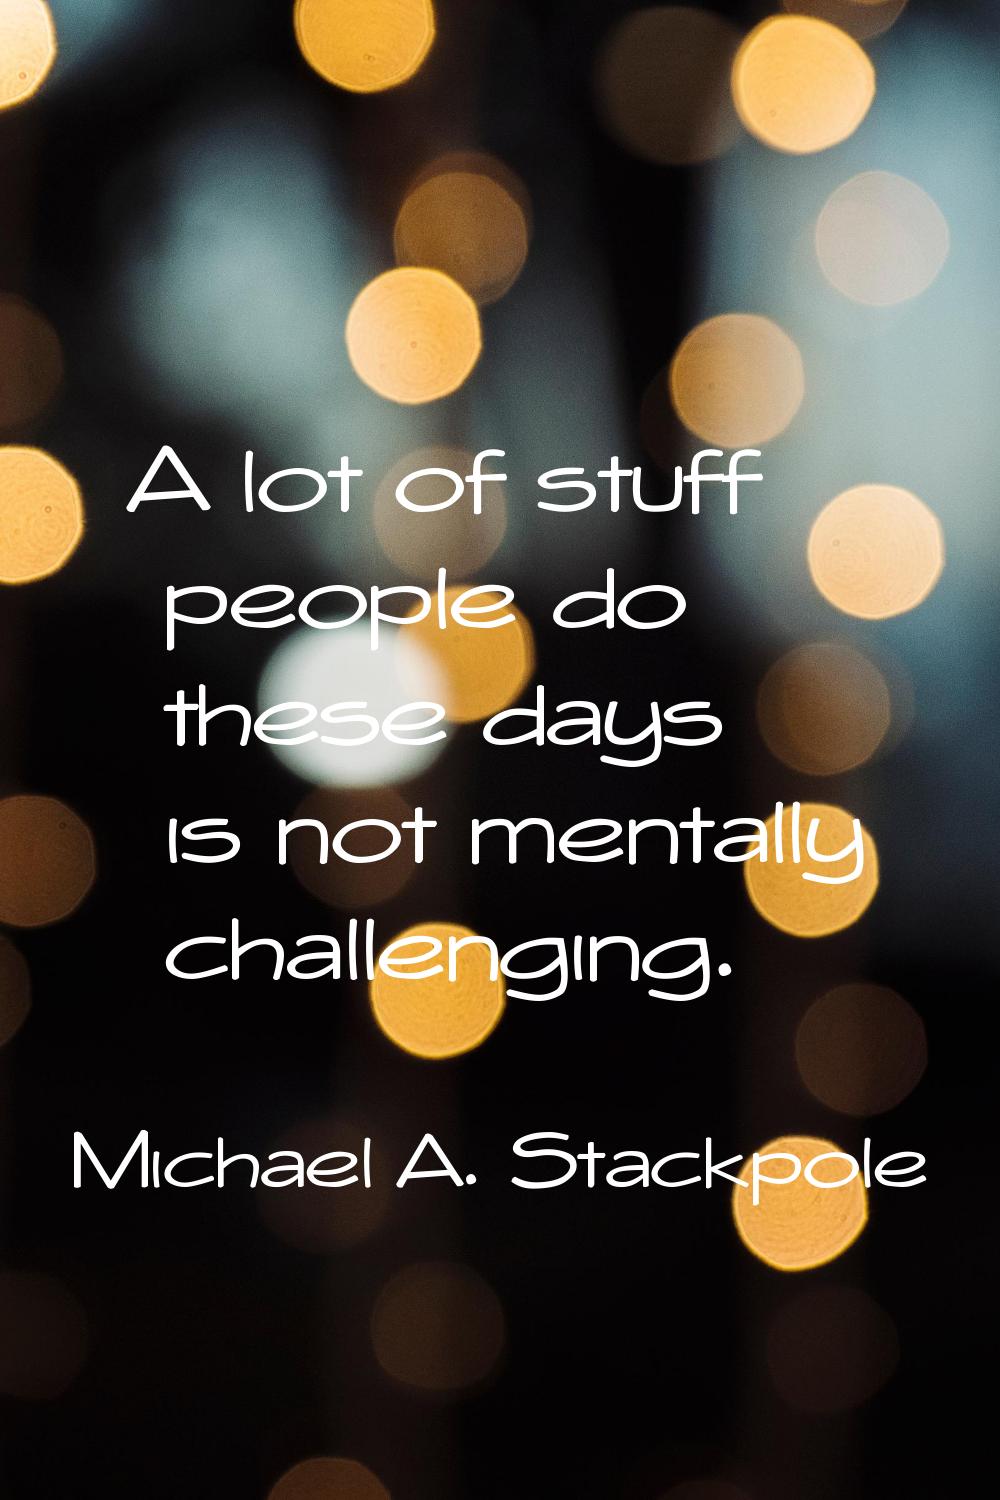 A lot of stuff people do these days is not mentally challenging.